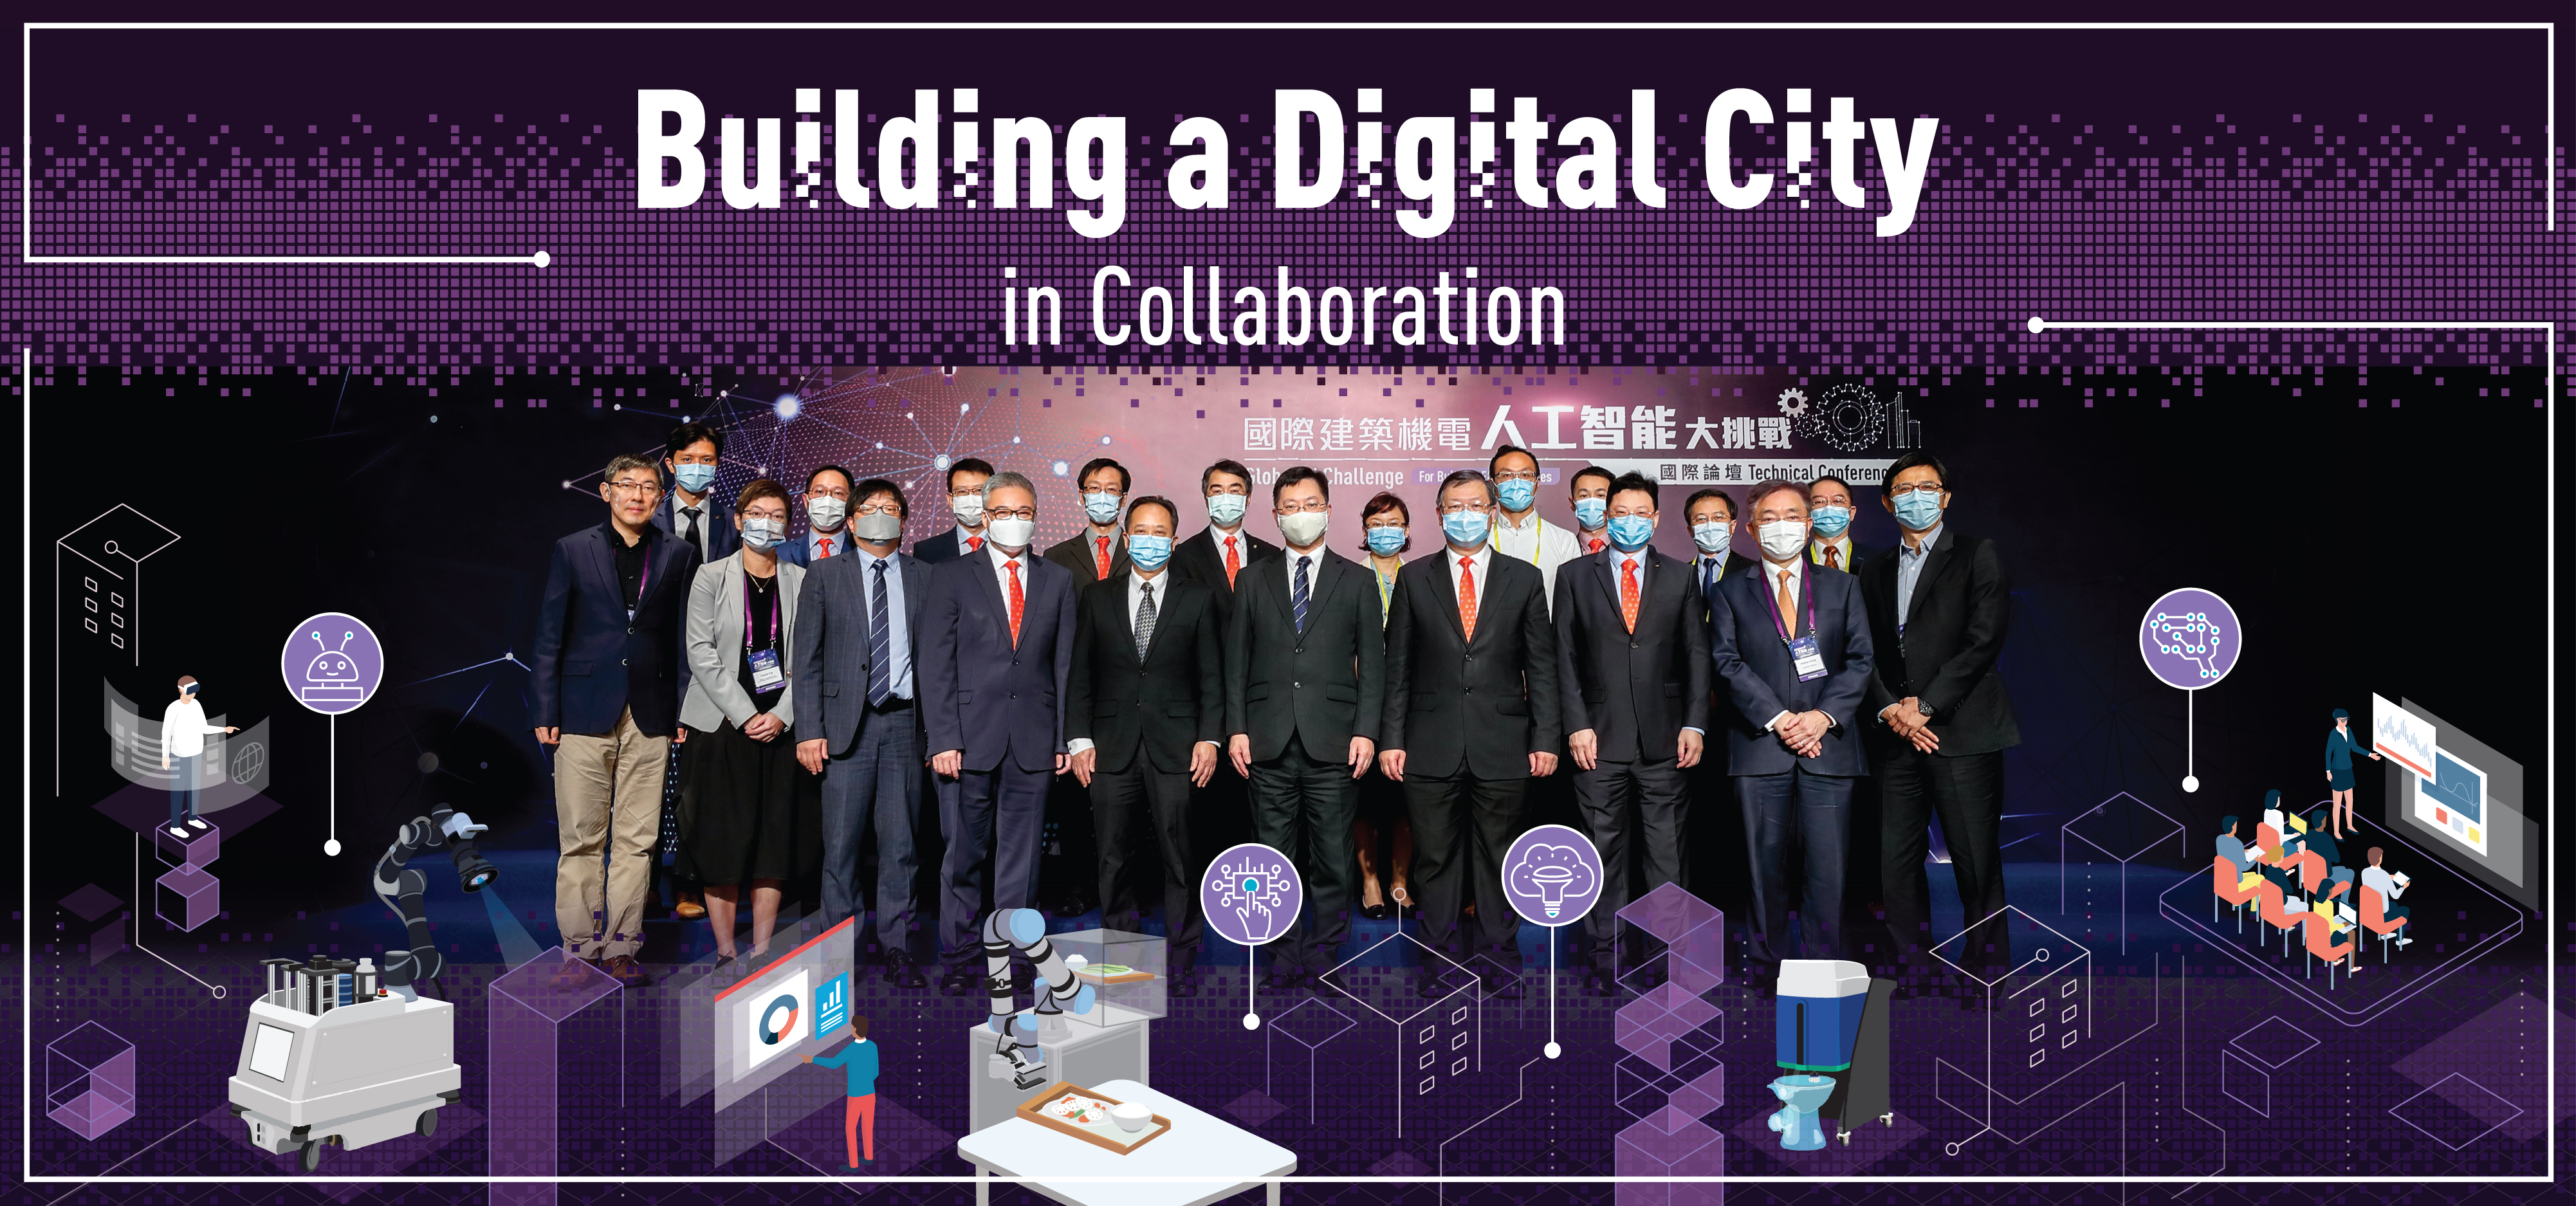 Building a Digital City in Collaboration